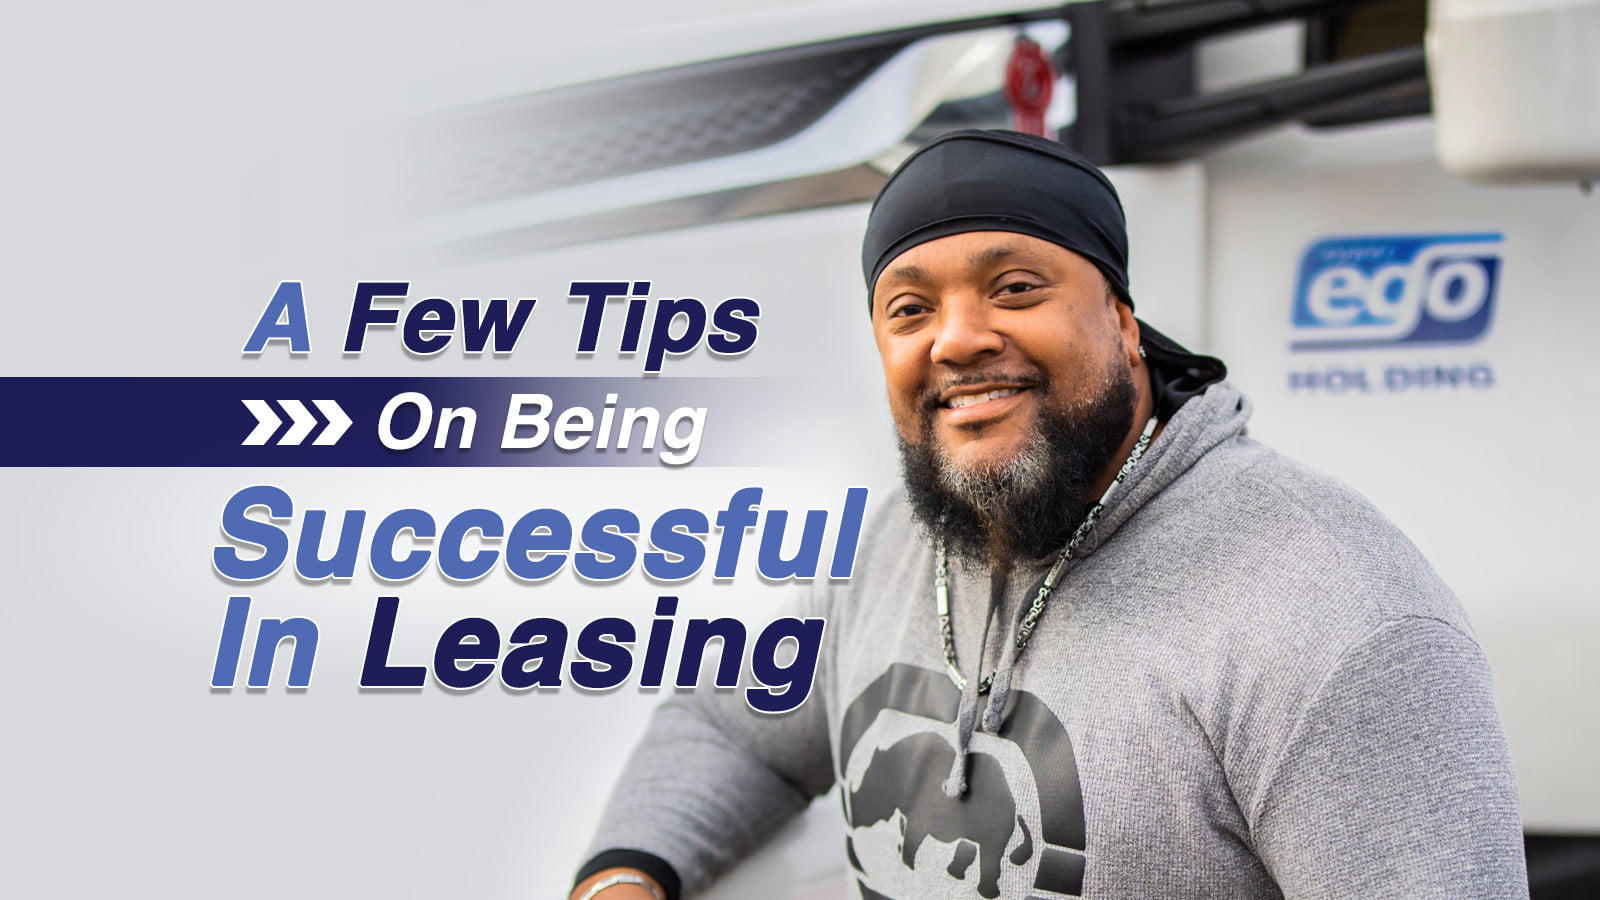 A Few Tips On Being Successful In Leasing